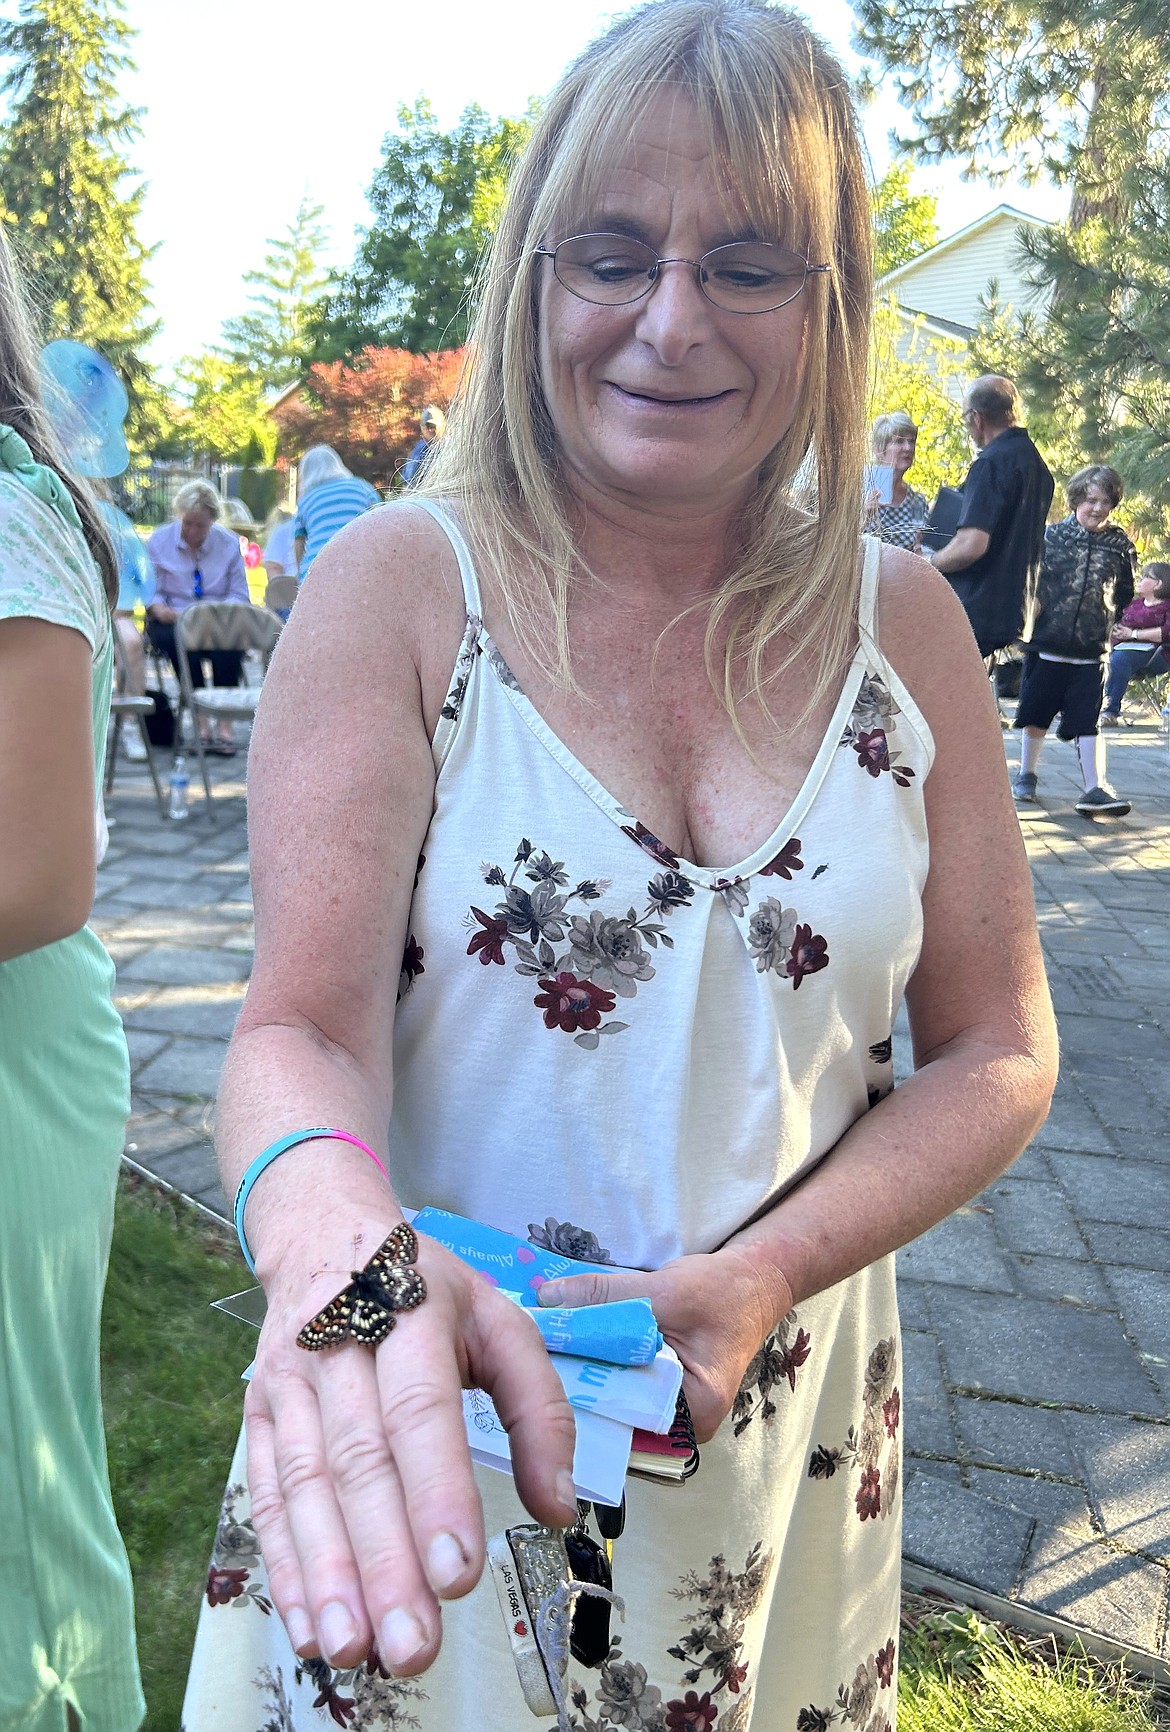 Christina Volk smiles as she looks at a butterfly on her hand during the Community Memorial Butterfly Release on Tuesday.